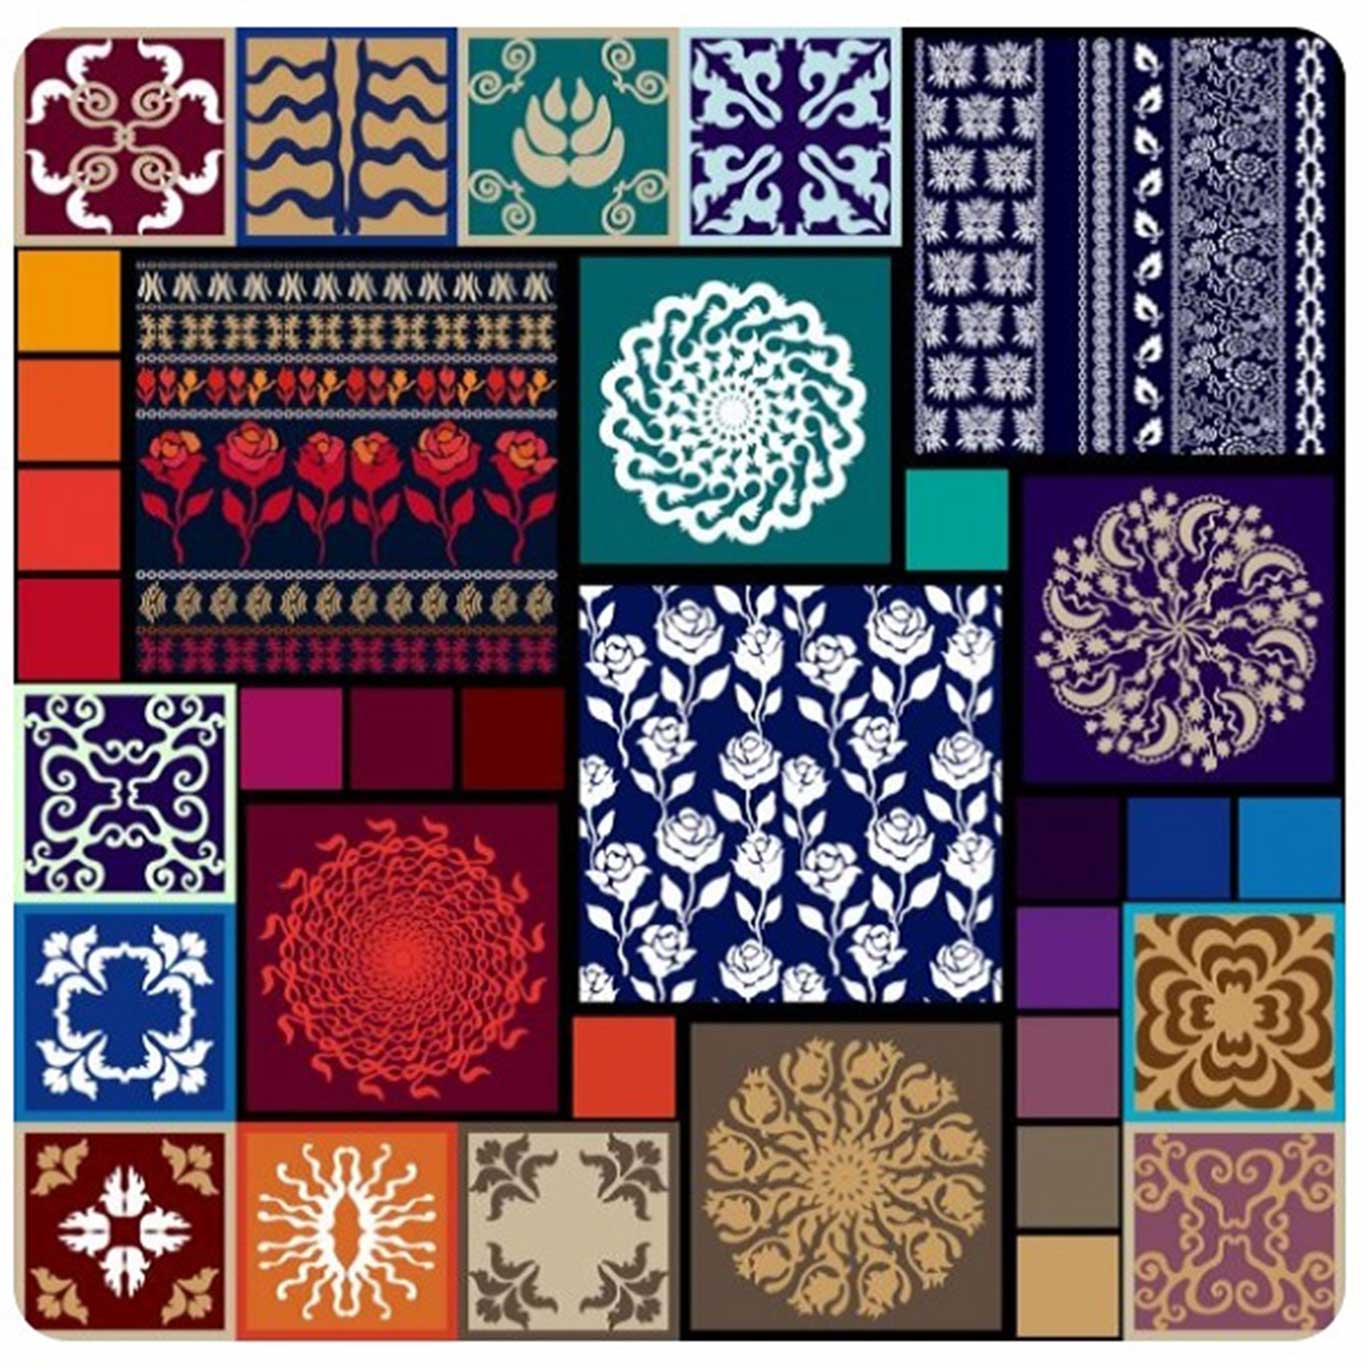 Colorful and different designs of bohemian patterns.